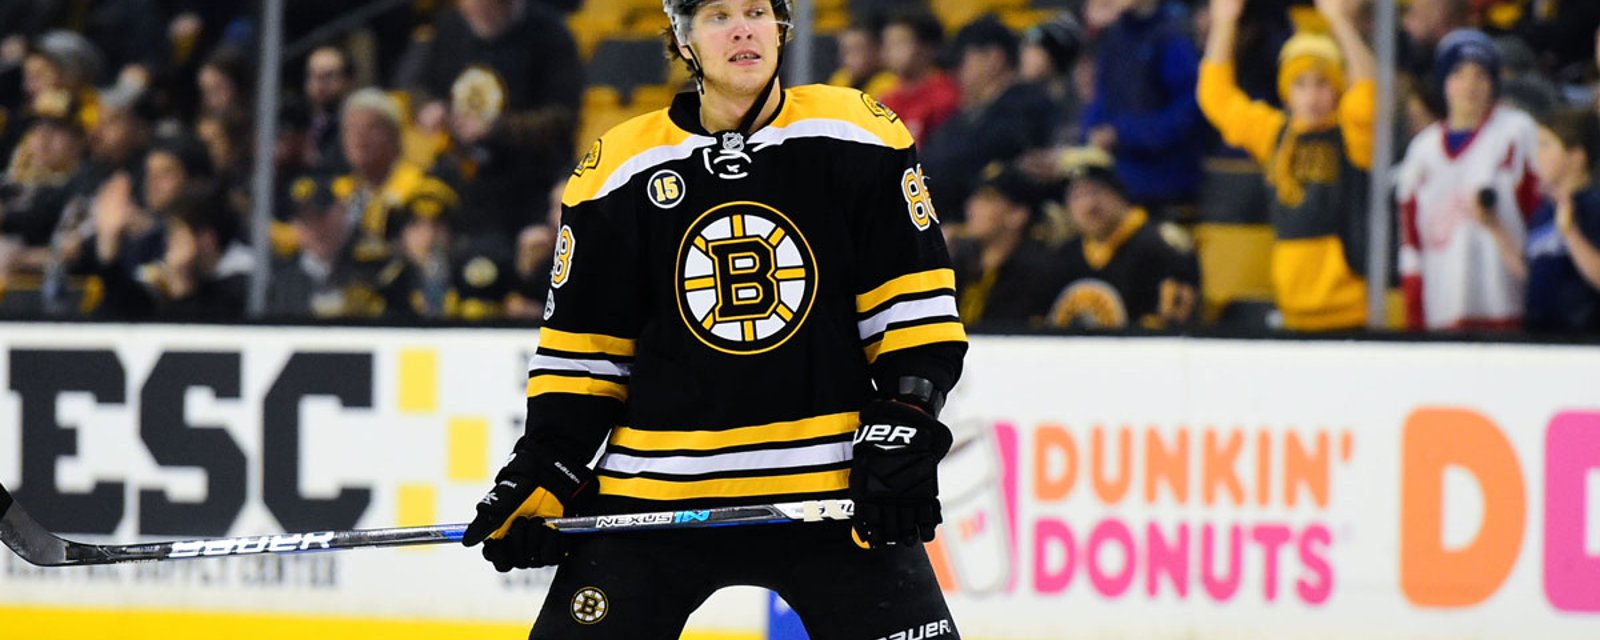 Pastrnak saga: the good, the bad and the ugly!